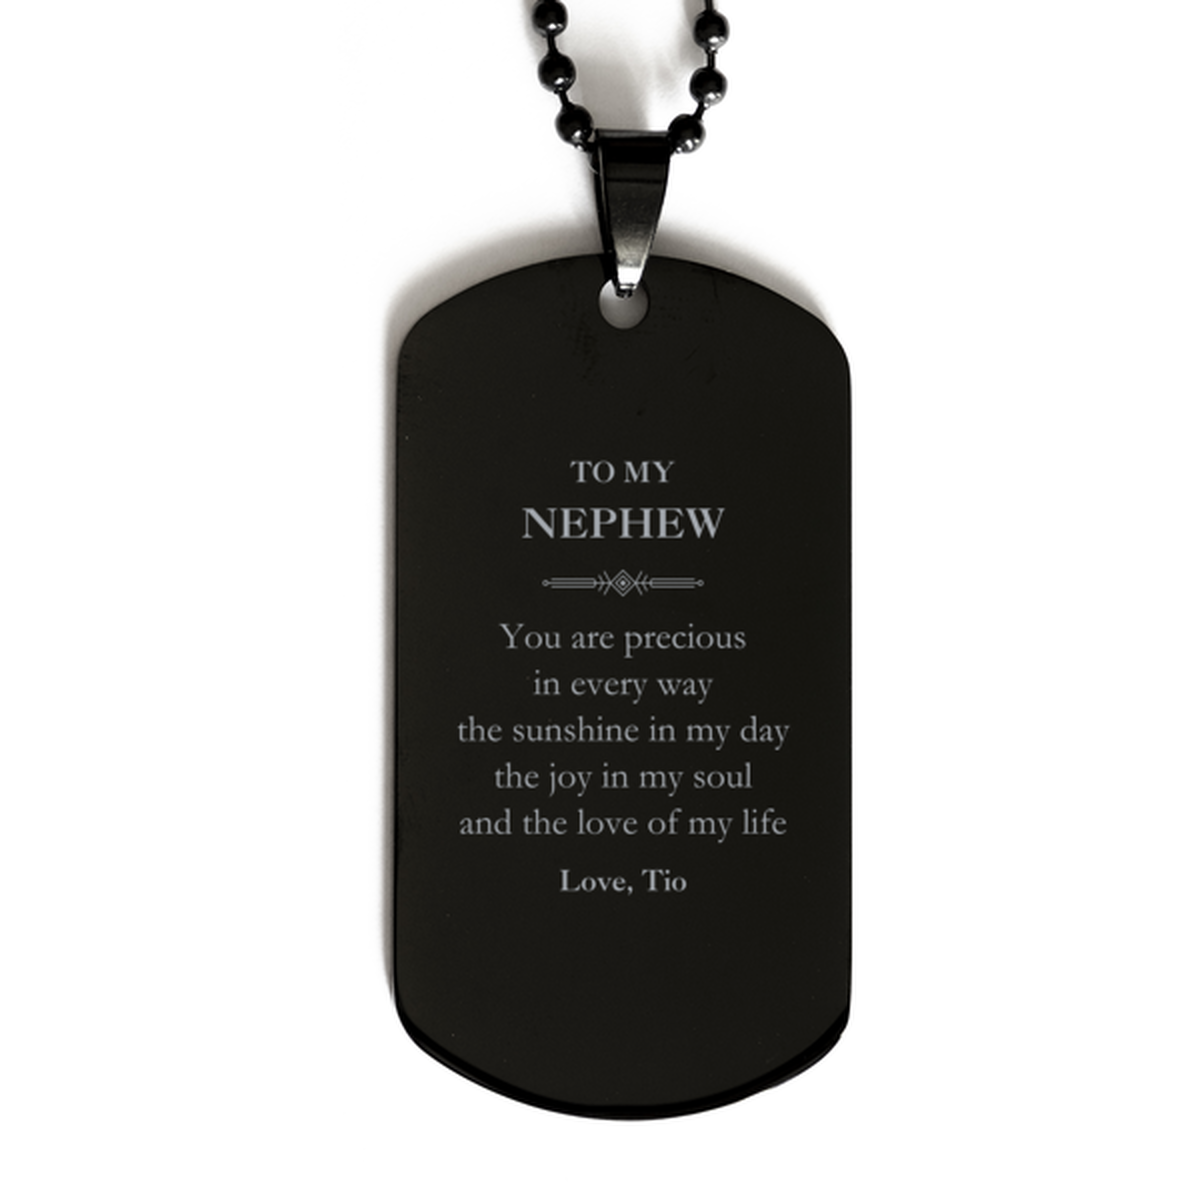 Graduation Gifts for Nephew Black Dog Tag Present from Tio, Christmas Nephew Birthday Gifts Nephew You are precious in every way the sunshine in my day. Love, Tio